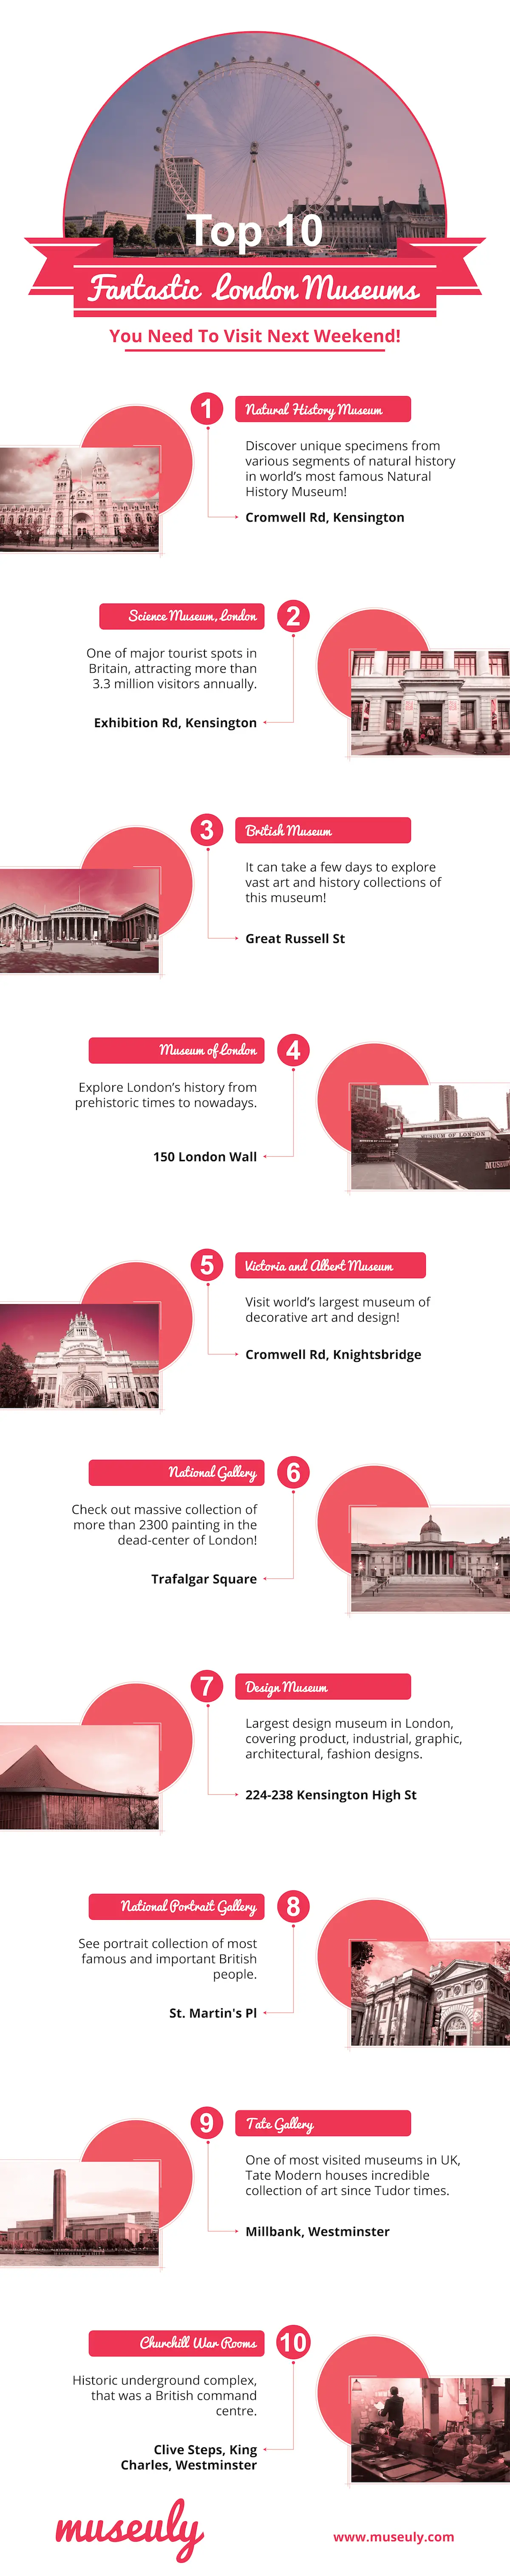 Infographic - top 10 museums in London